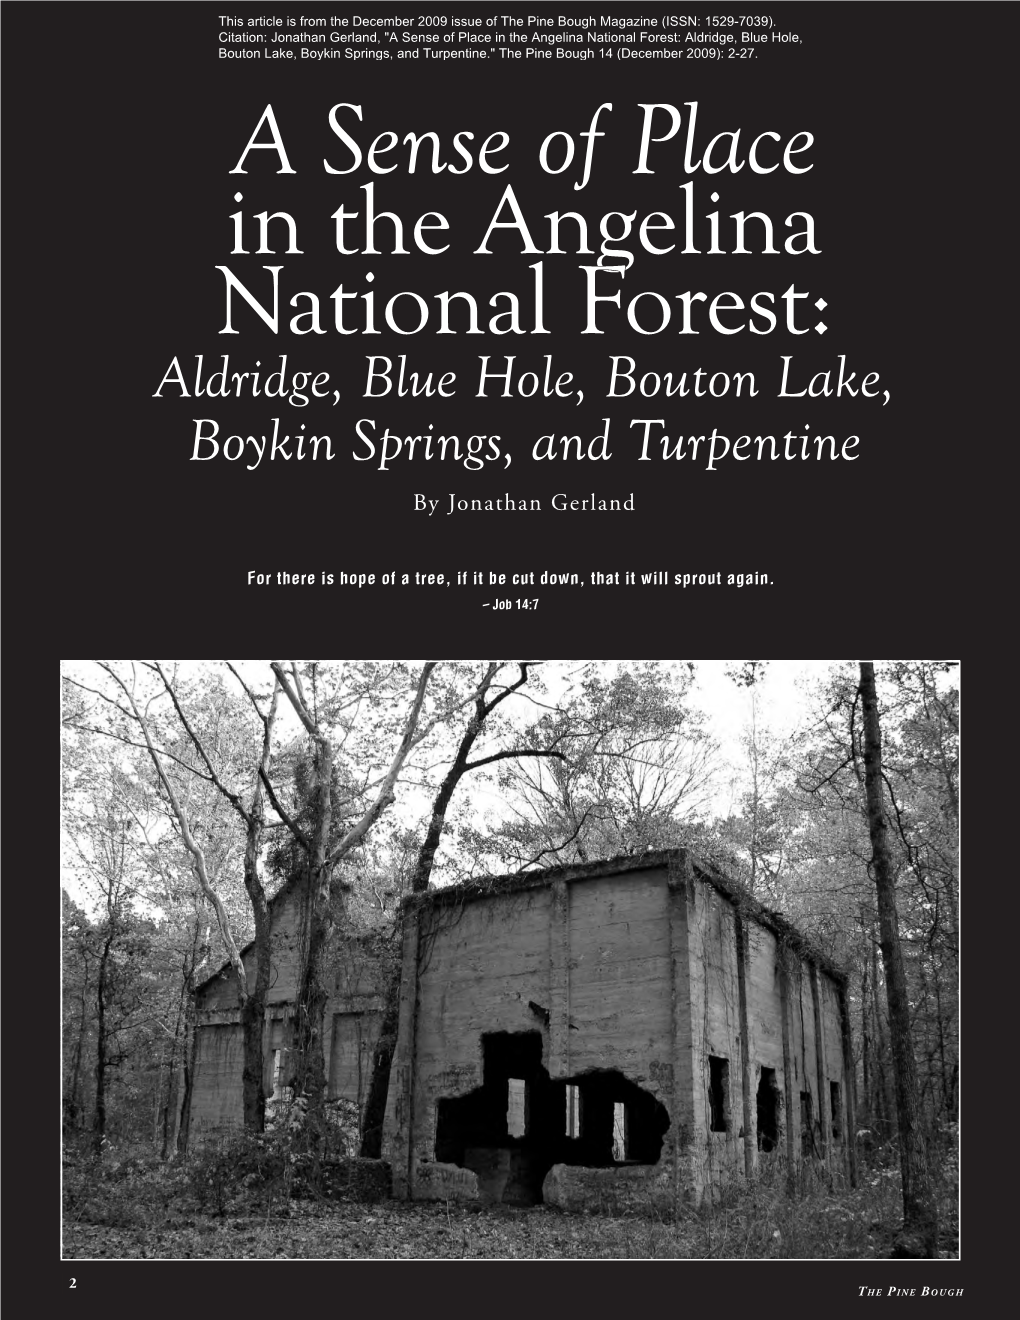 A Sense of Place in the Angelina National Forest: Aldridge, Blue Hole, Bouton Lake, Boykin Springs, and Turpentine." the Pine Bough 14 (December 2009): 2-27